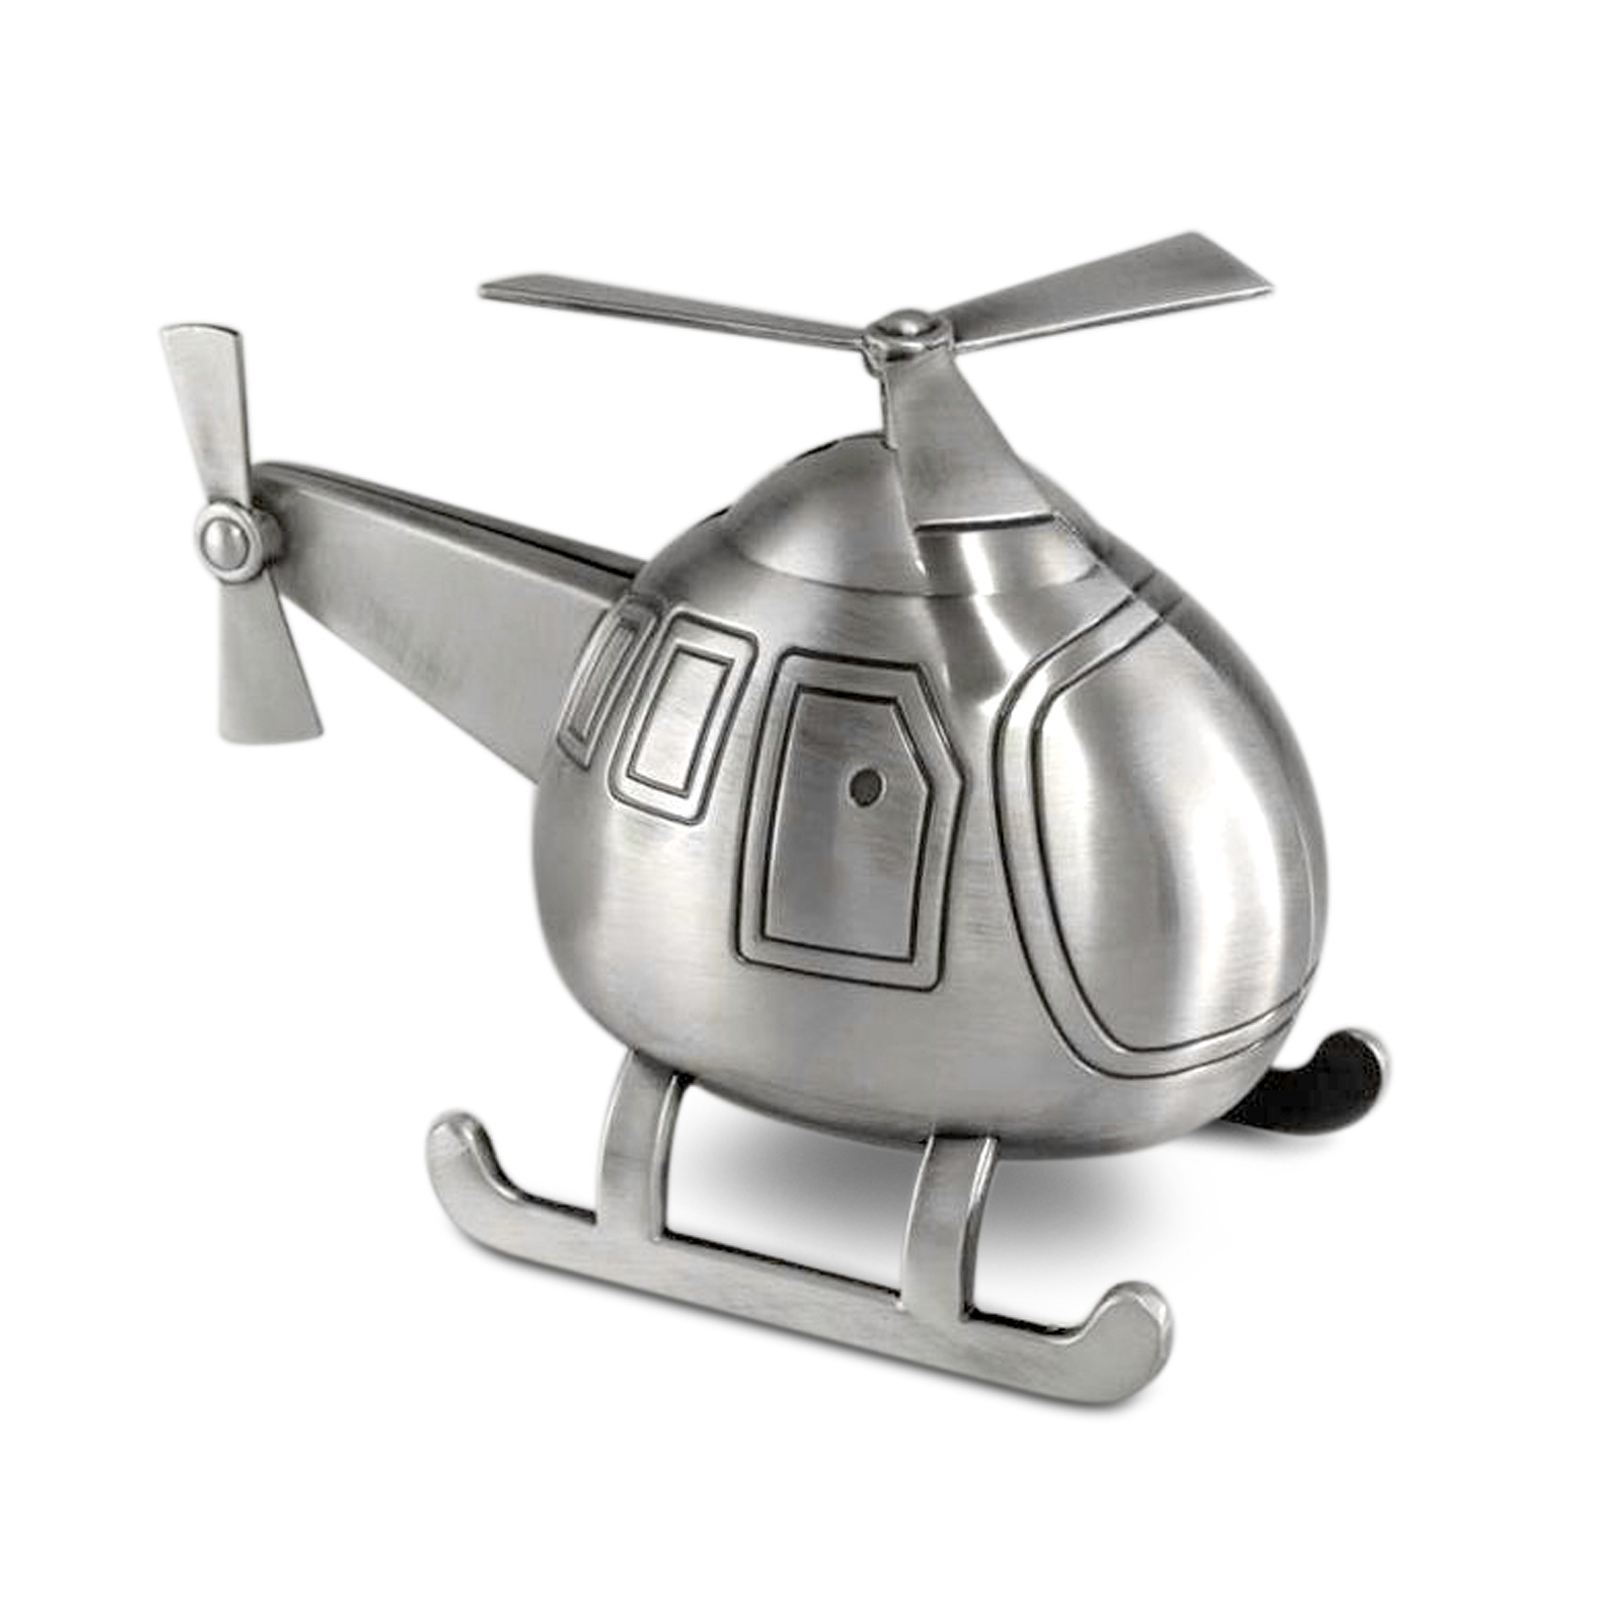 Helicopter money save bank